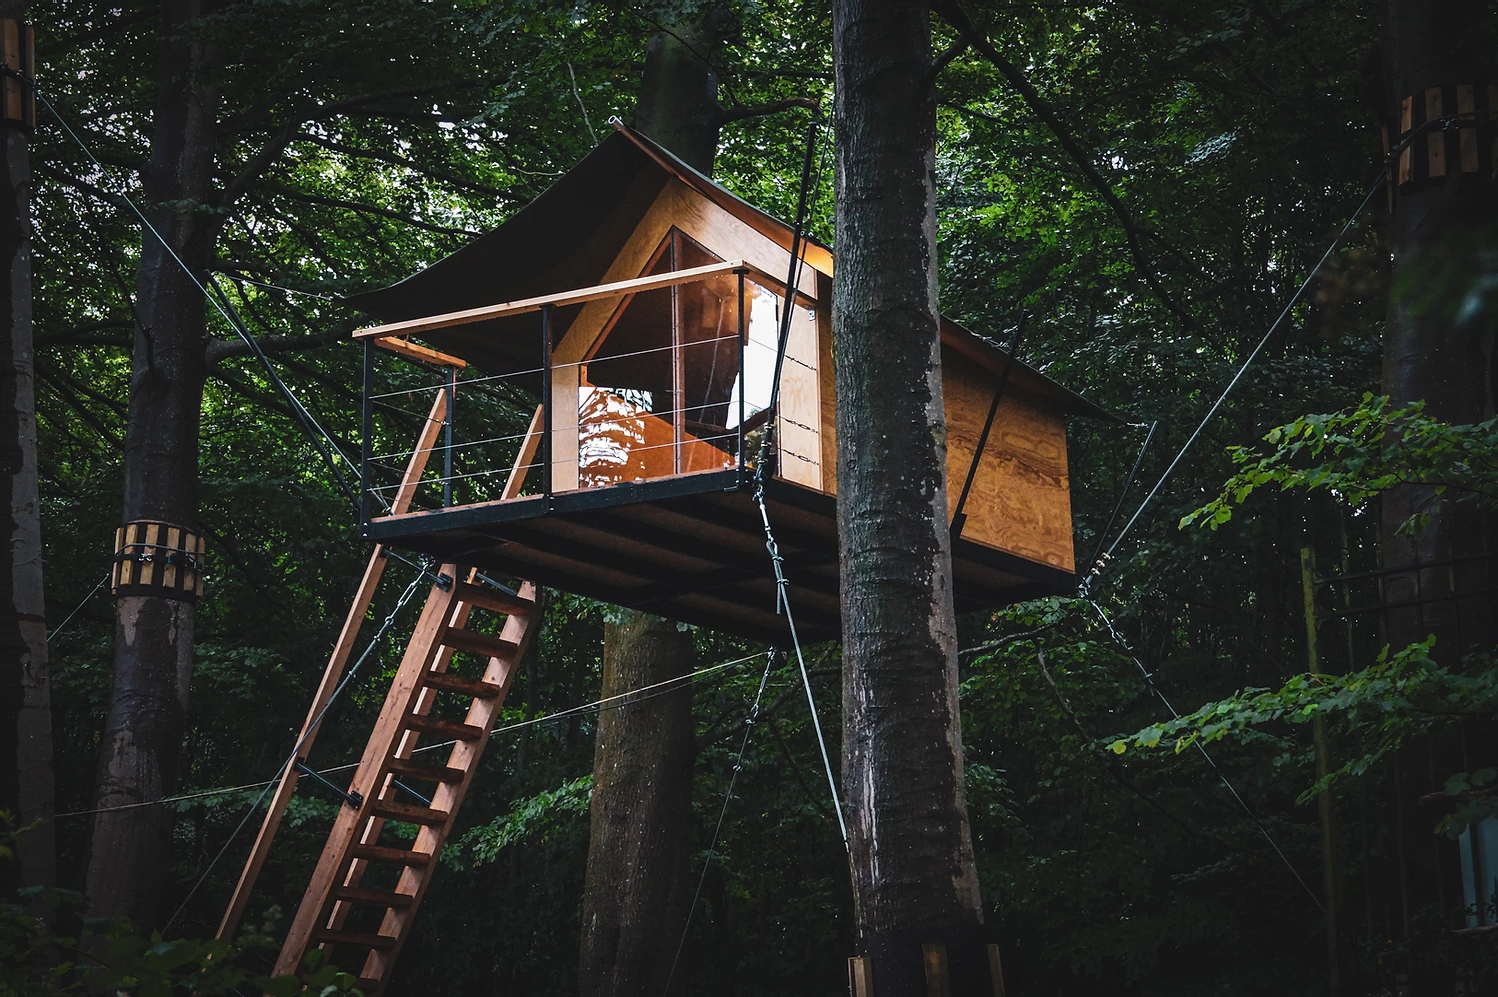 Boomkamp Treehouse Hotel Is All About The Simple Pleasures